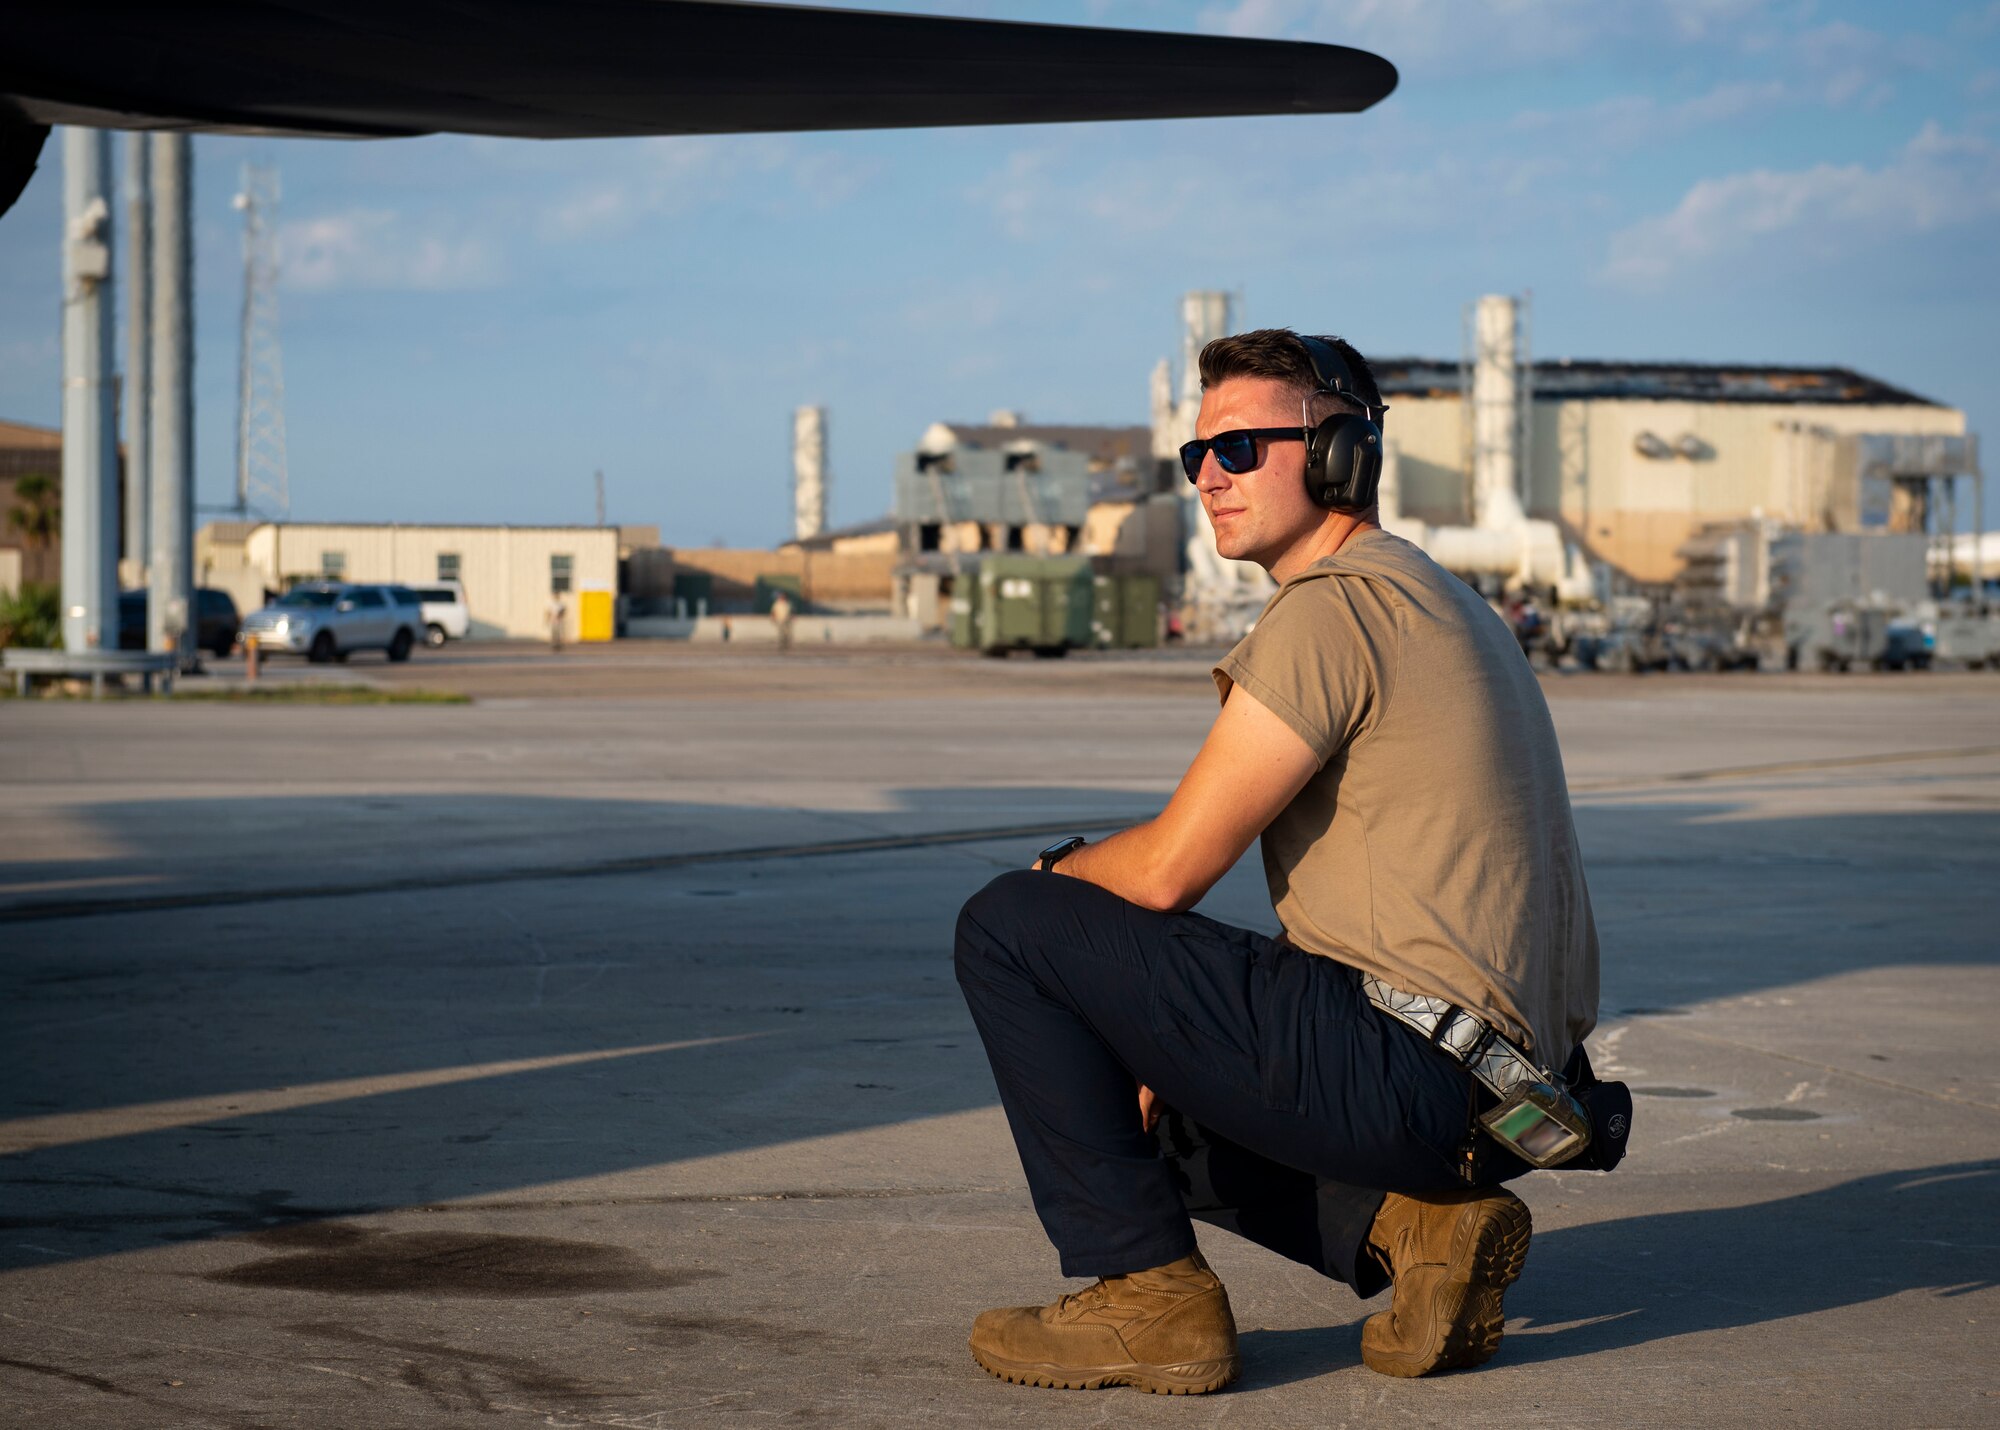 Senior Airman Caleb Crook, 757th Aircraft Maintenance Squadron aircraft electrical and environmental systems specialist, assists an aircraft launch during Combat Archer 19-12 on Tyndall Air Force Base, Fla., Sept. 24, 2019. The F-15E has the capability to fight its way to a target over long ranges, destroy enemy ground positions and fight its way out. (U.S. Air Force photo illustration by Airman 1st Class Bailee A. Darbasie)